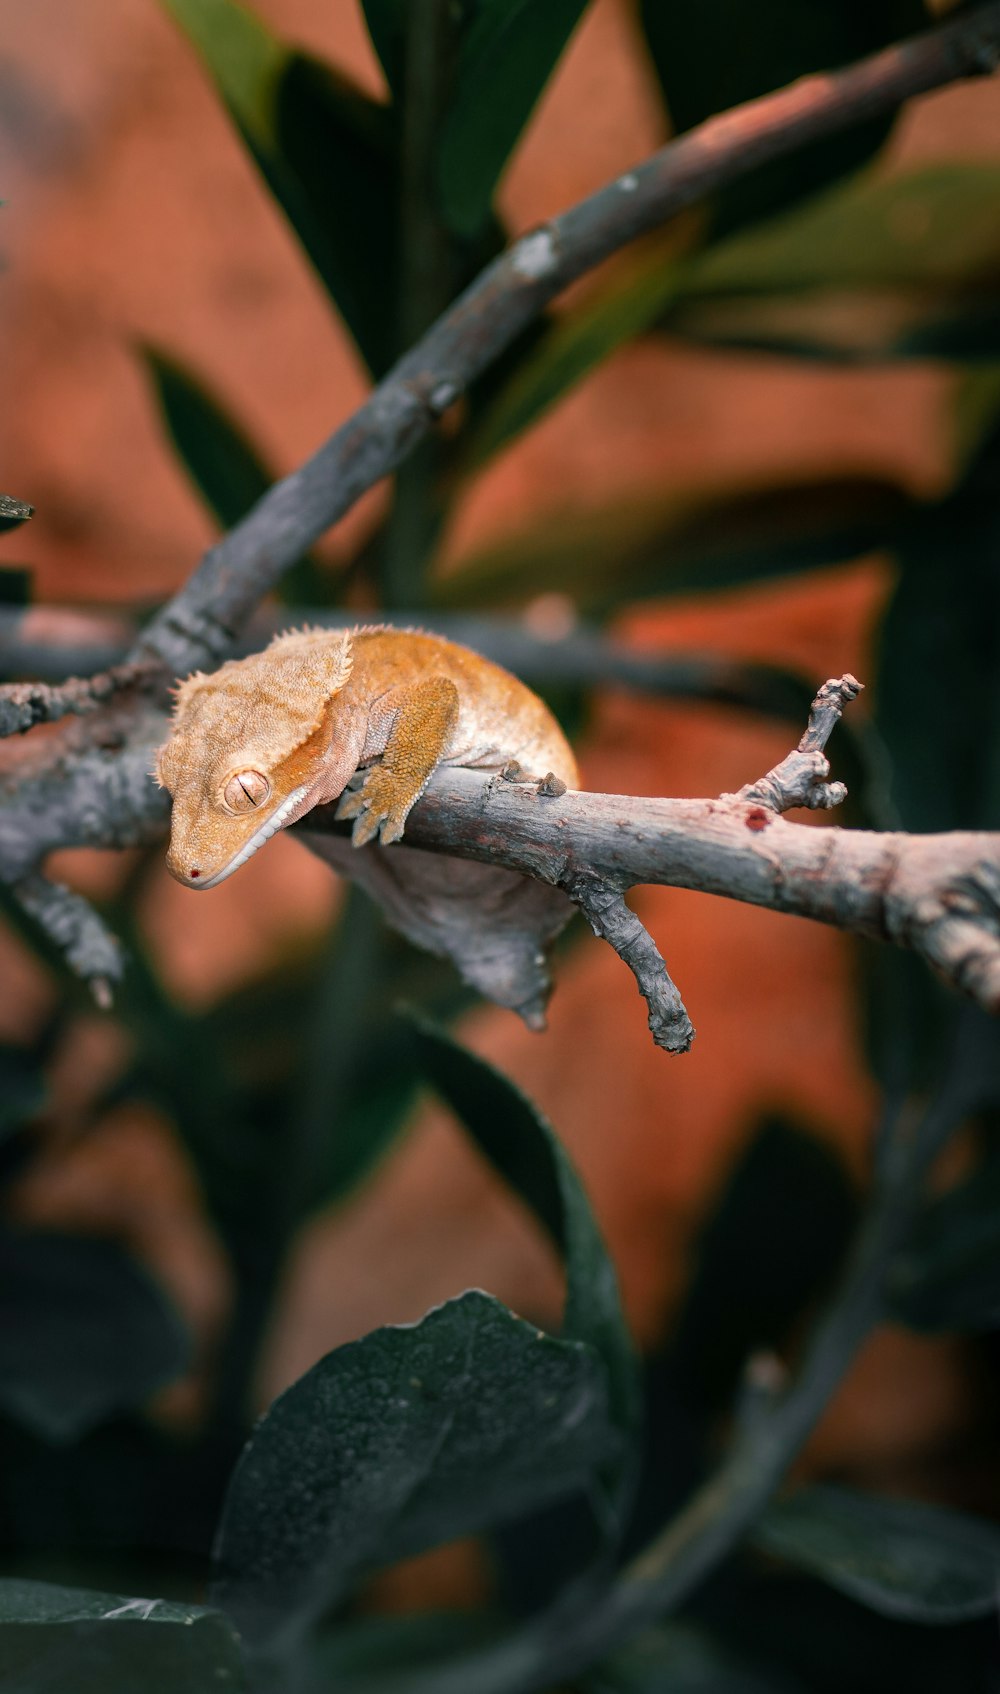 Preventing and Treating Common Health Issues in Crested Geckos